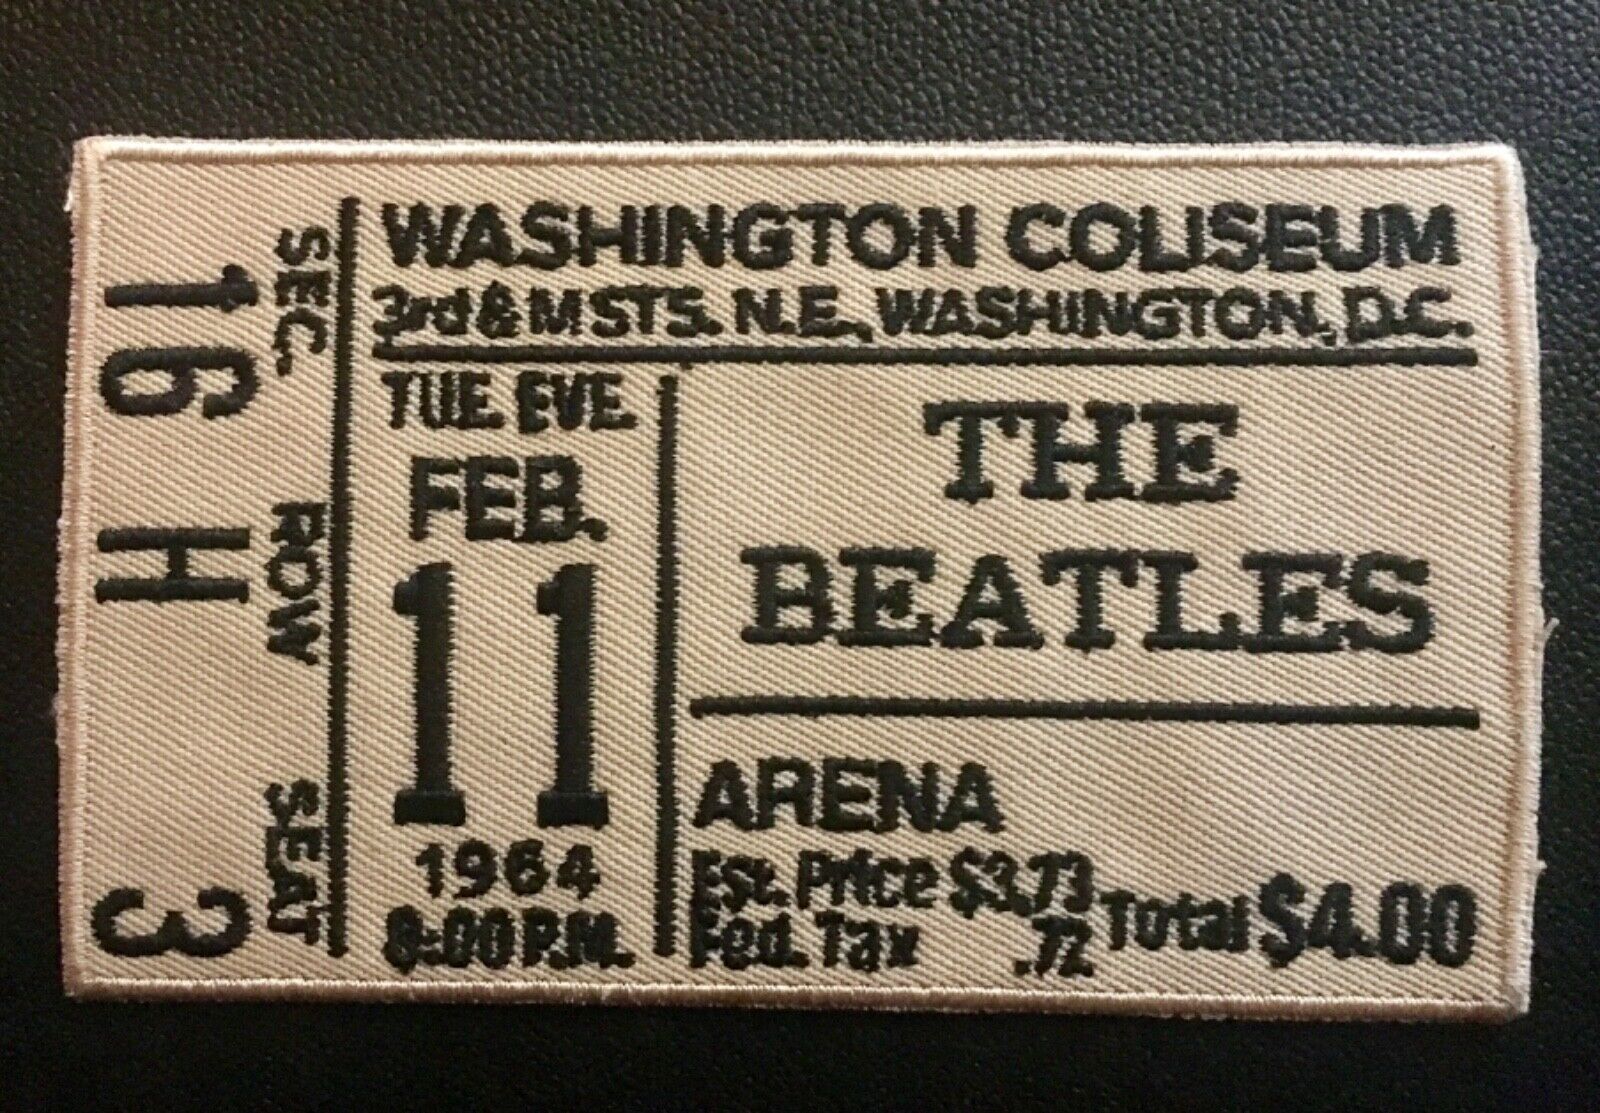 THE BEATLES Ticket EMBROIDERED PATCH 1st US CONCERT 4x2” Beatlemania